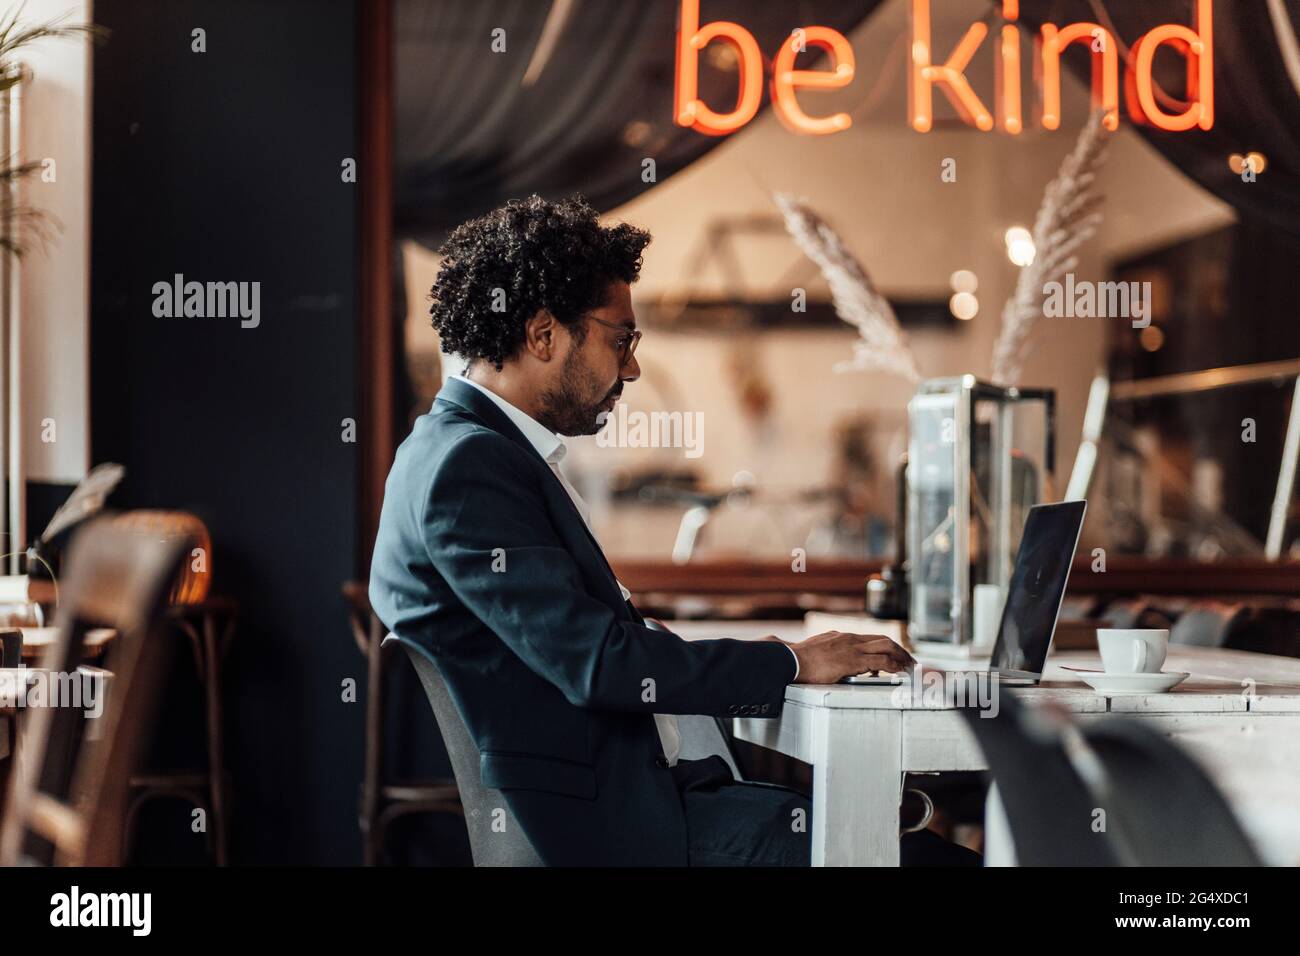 Male professional typing on laptop while working in cafe Stock Photo